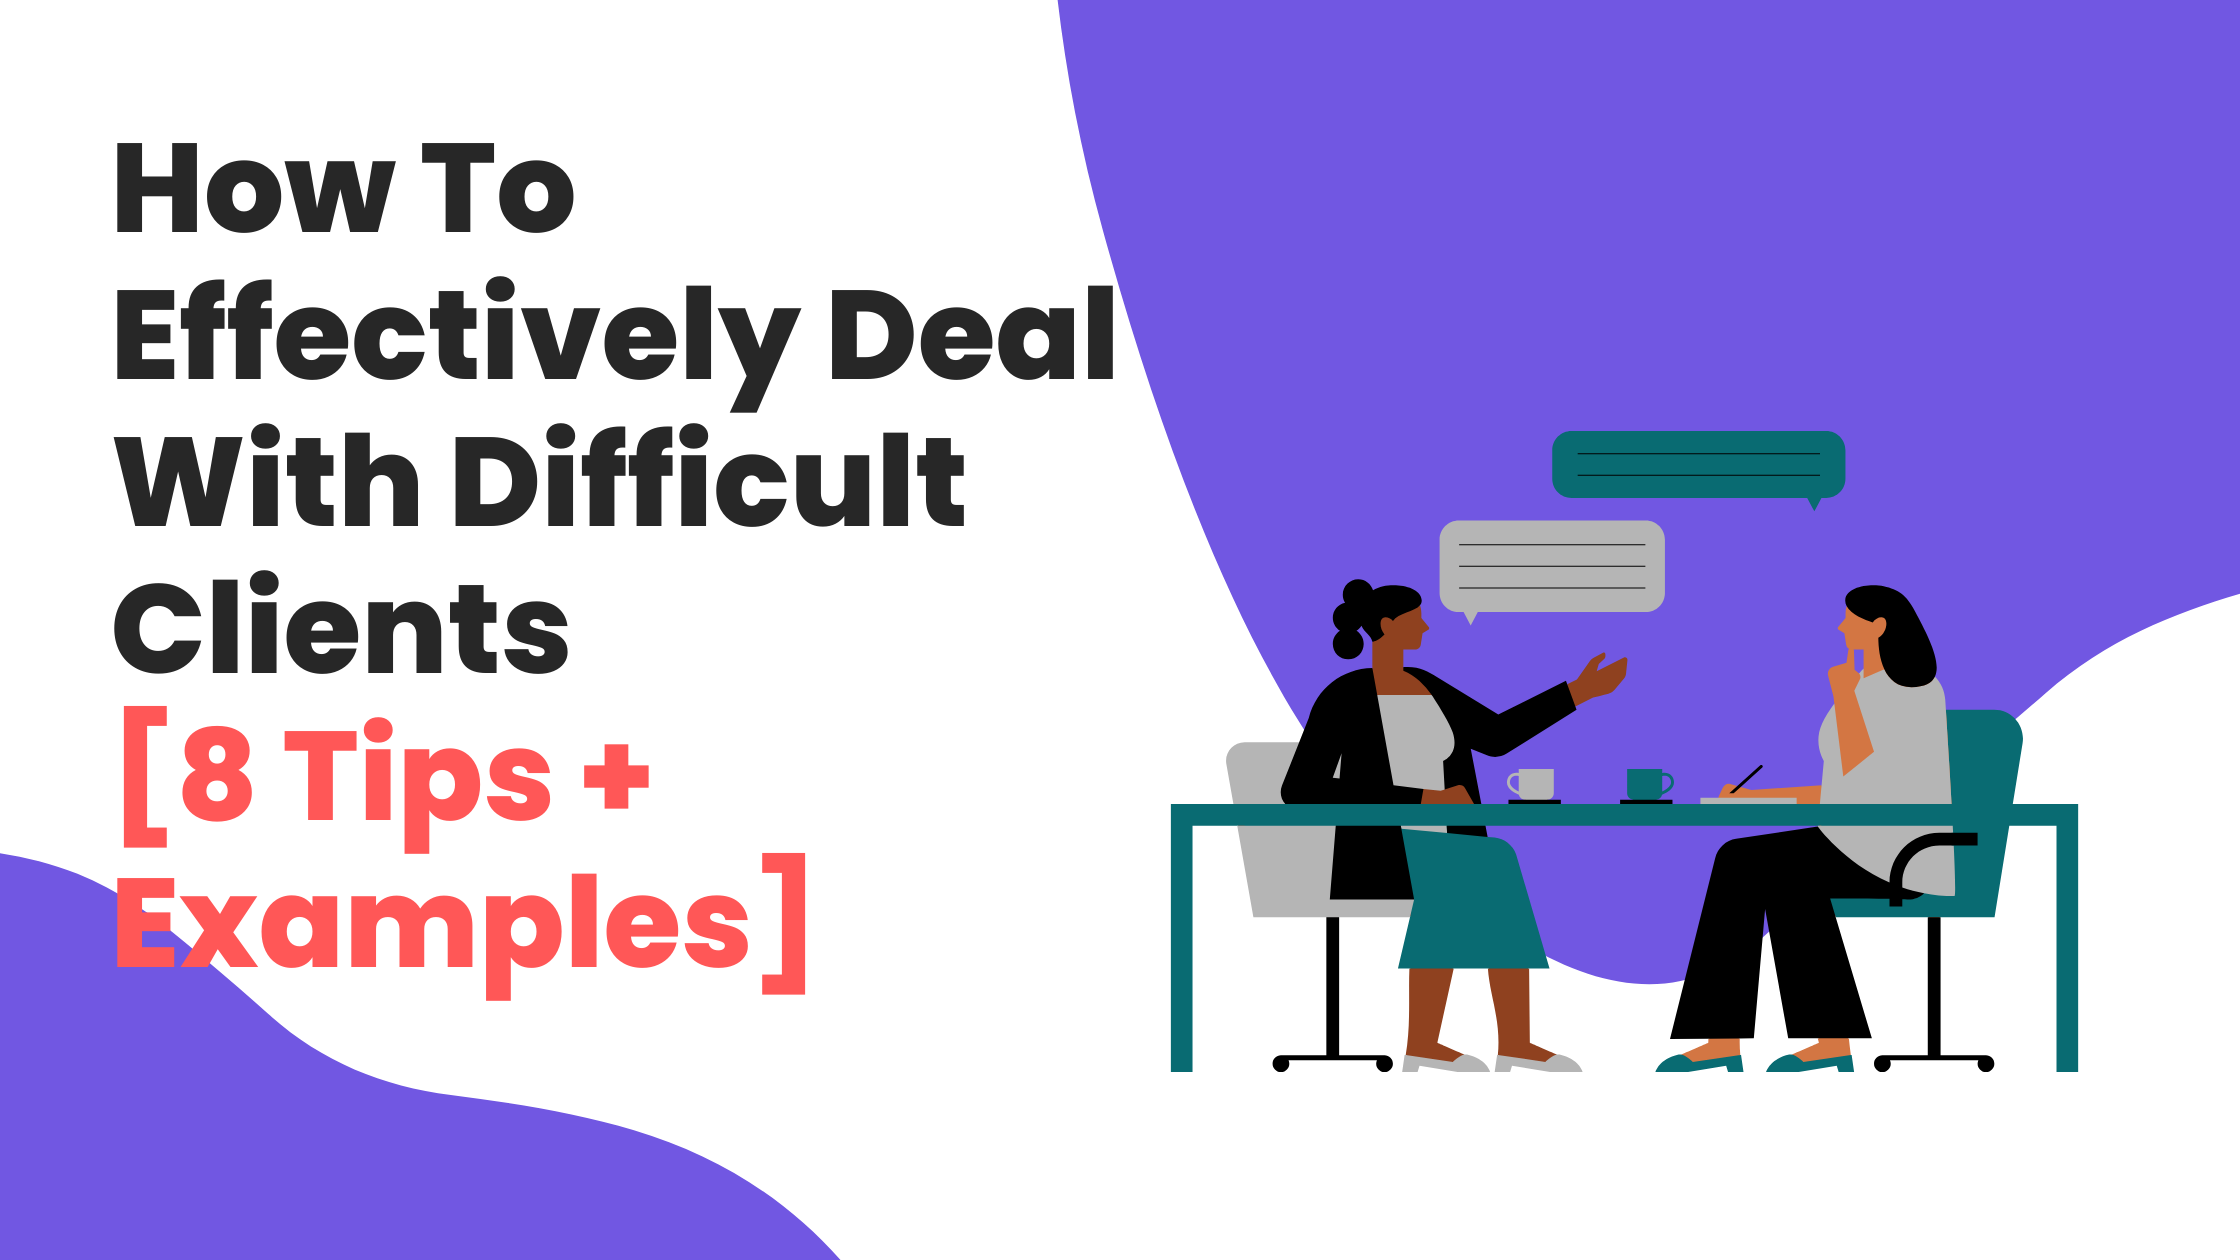 How To Effectively Deal With Difficult Clients [8 Tips + Examples]